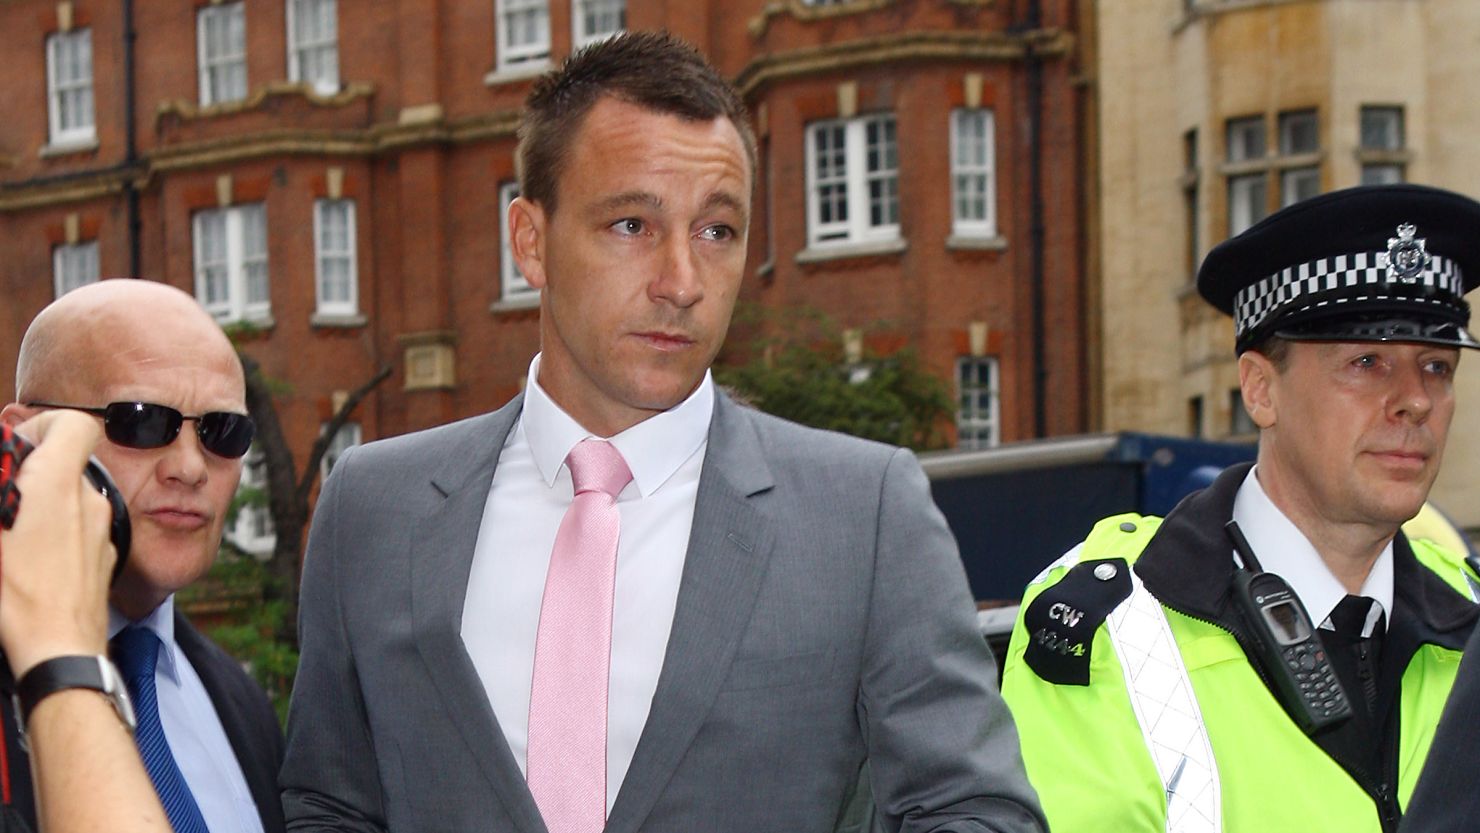 John Terry was cleared at a trial last month of racially abusing QPR player Anton Ferdinand.